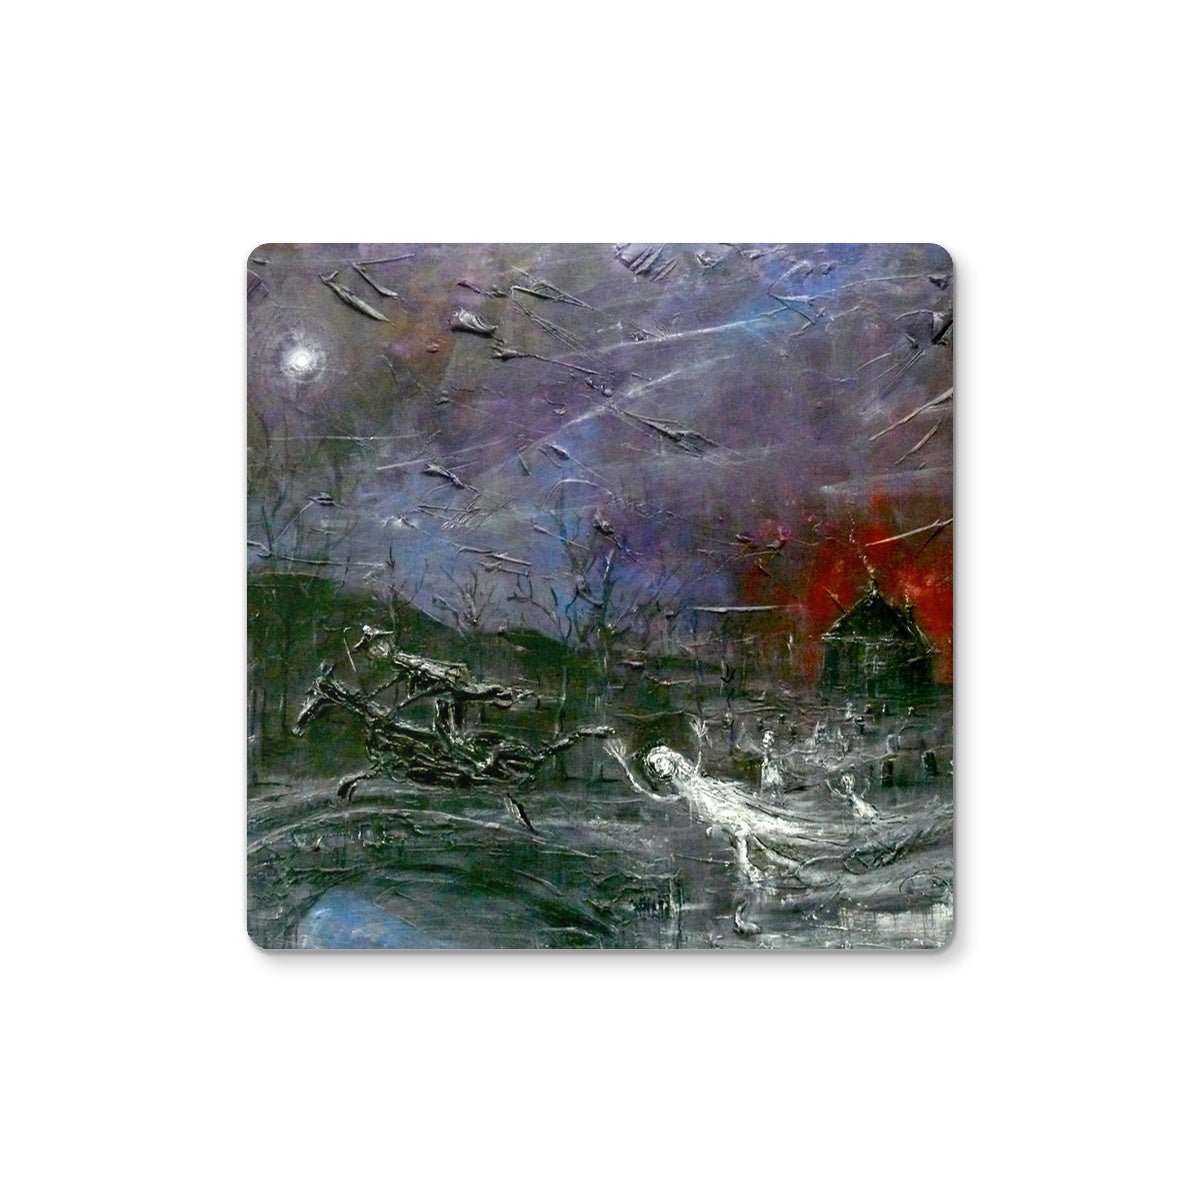 Tam O Shanter Art Gifts Coaster-Coasters-Abstract & Impressionistic Art Gallery-Single Coaster-Paintings, Prints, Homeware, Art Gifts From Scotland By Scottish Artist Kevin Hunter